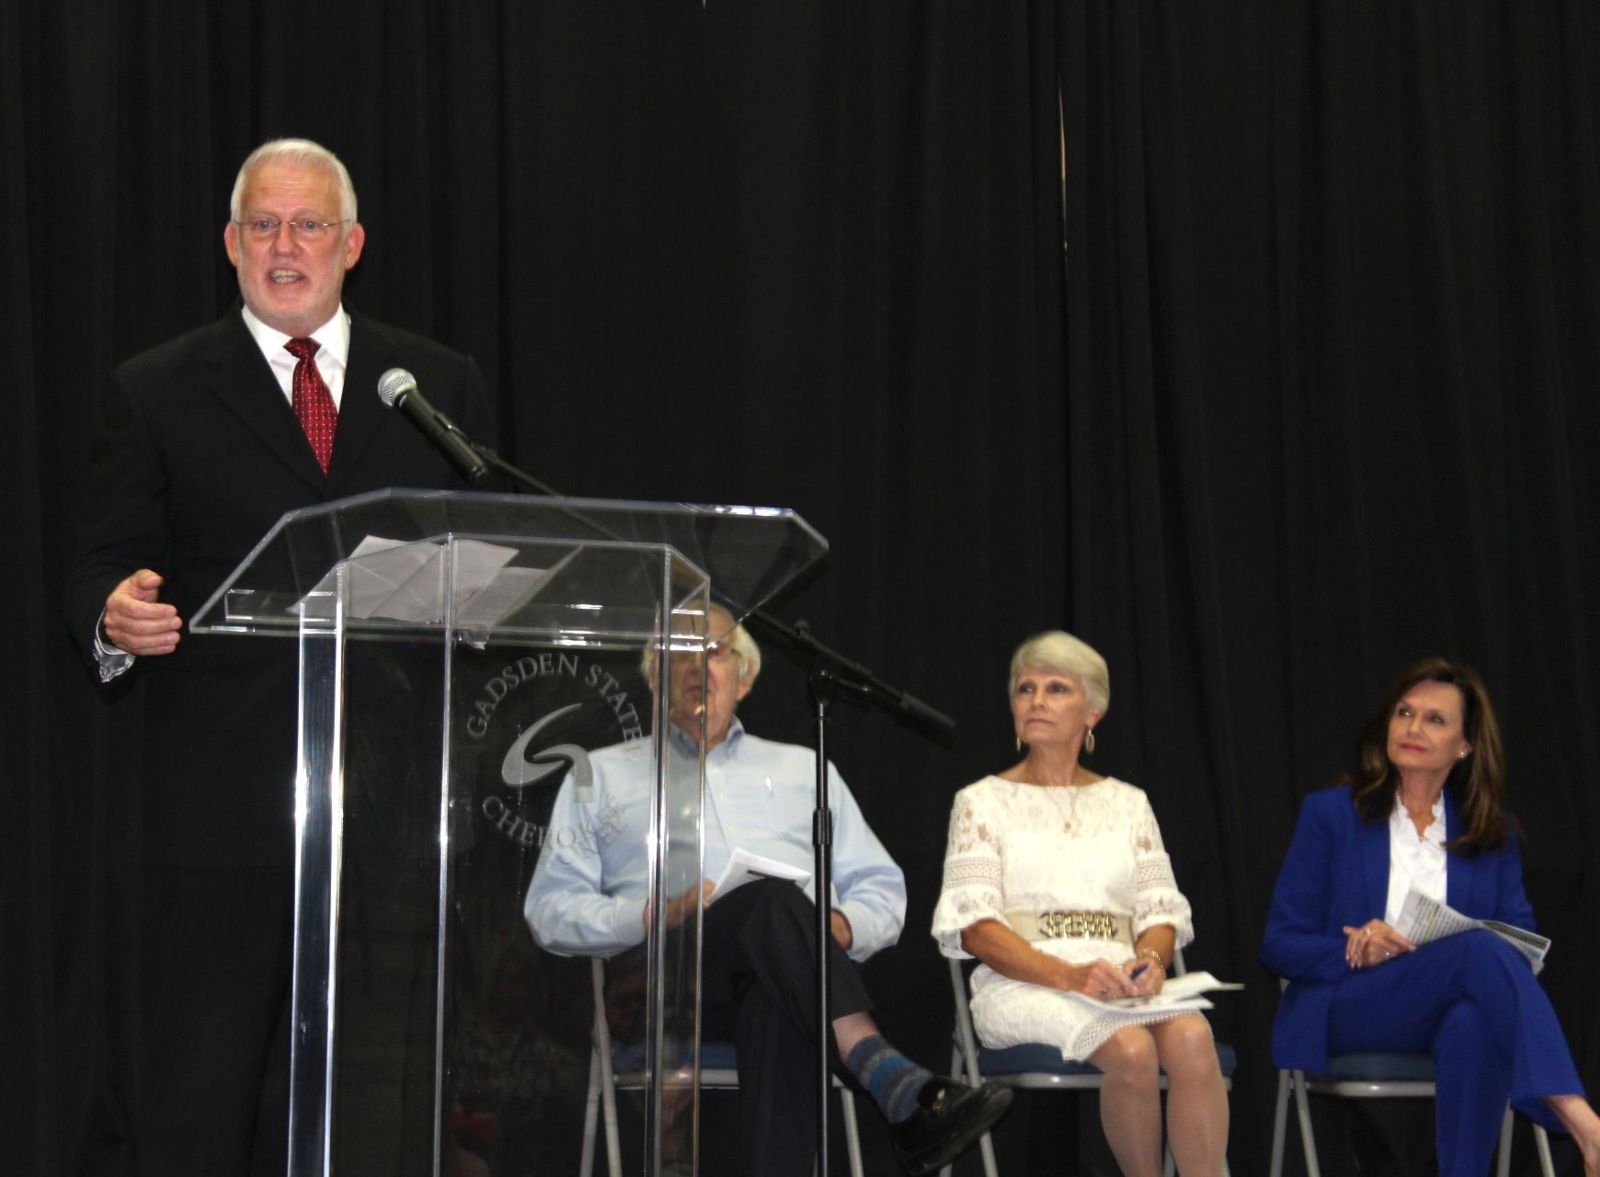 Richard Linsdey speaks during the Naming Ceremony of the Richard Lindsey Arena. Looking on are, from right, Al Shumaker, Dr. Kathy Murphy and Joy Perry.